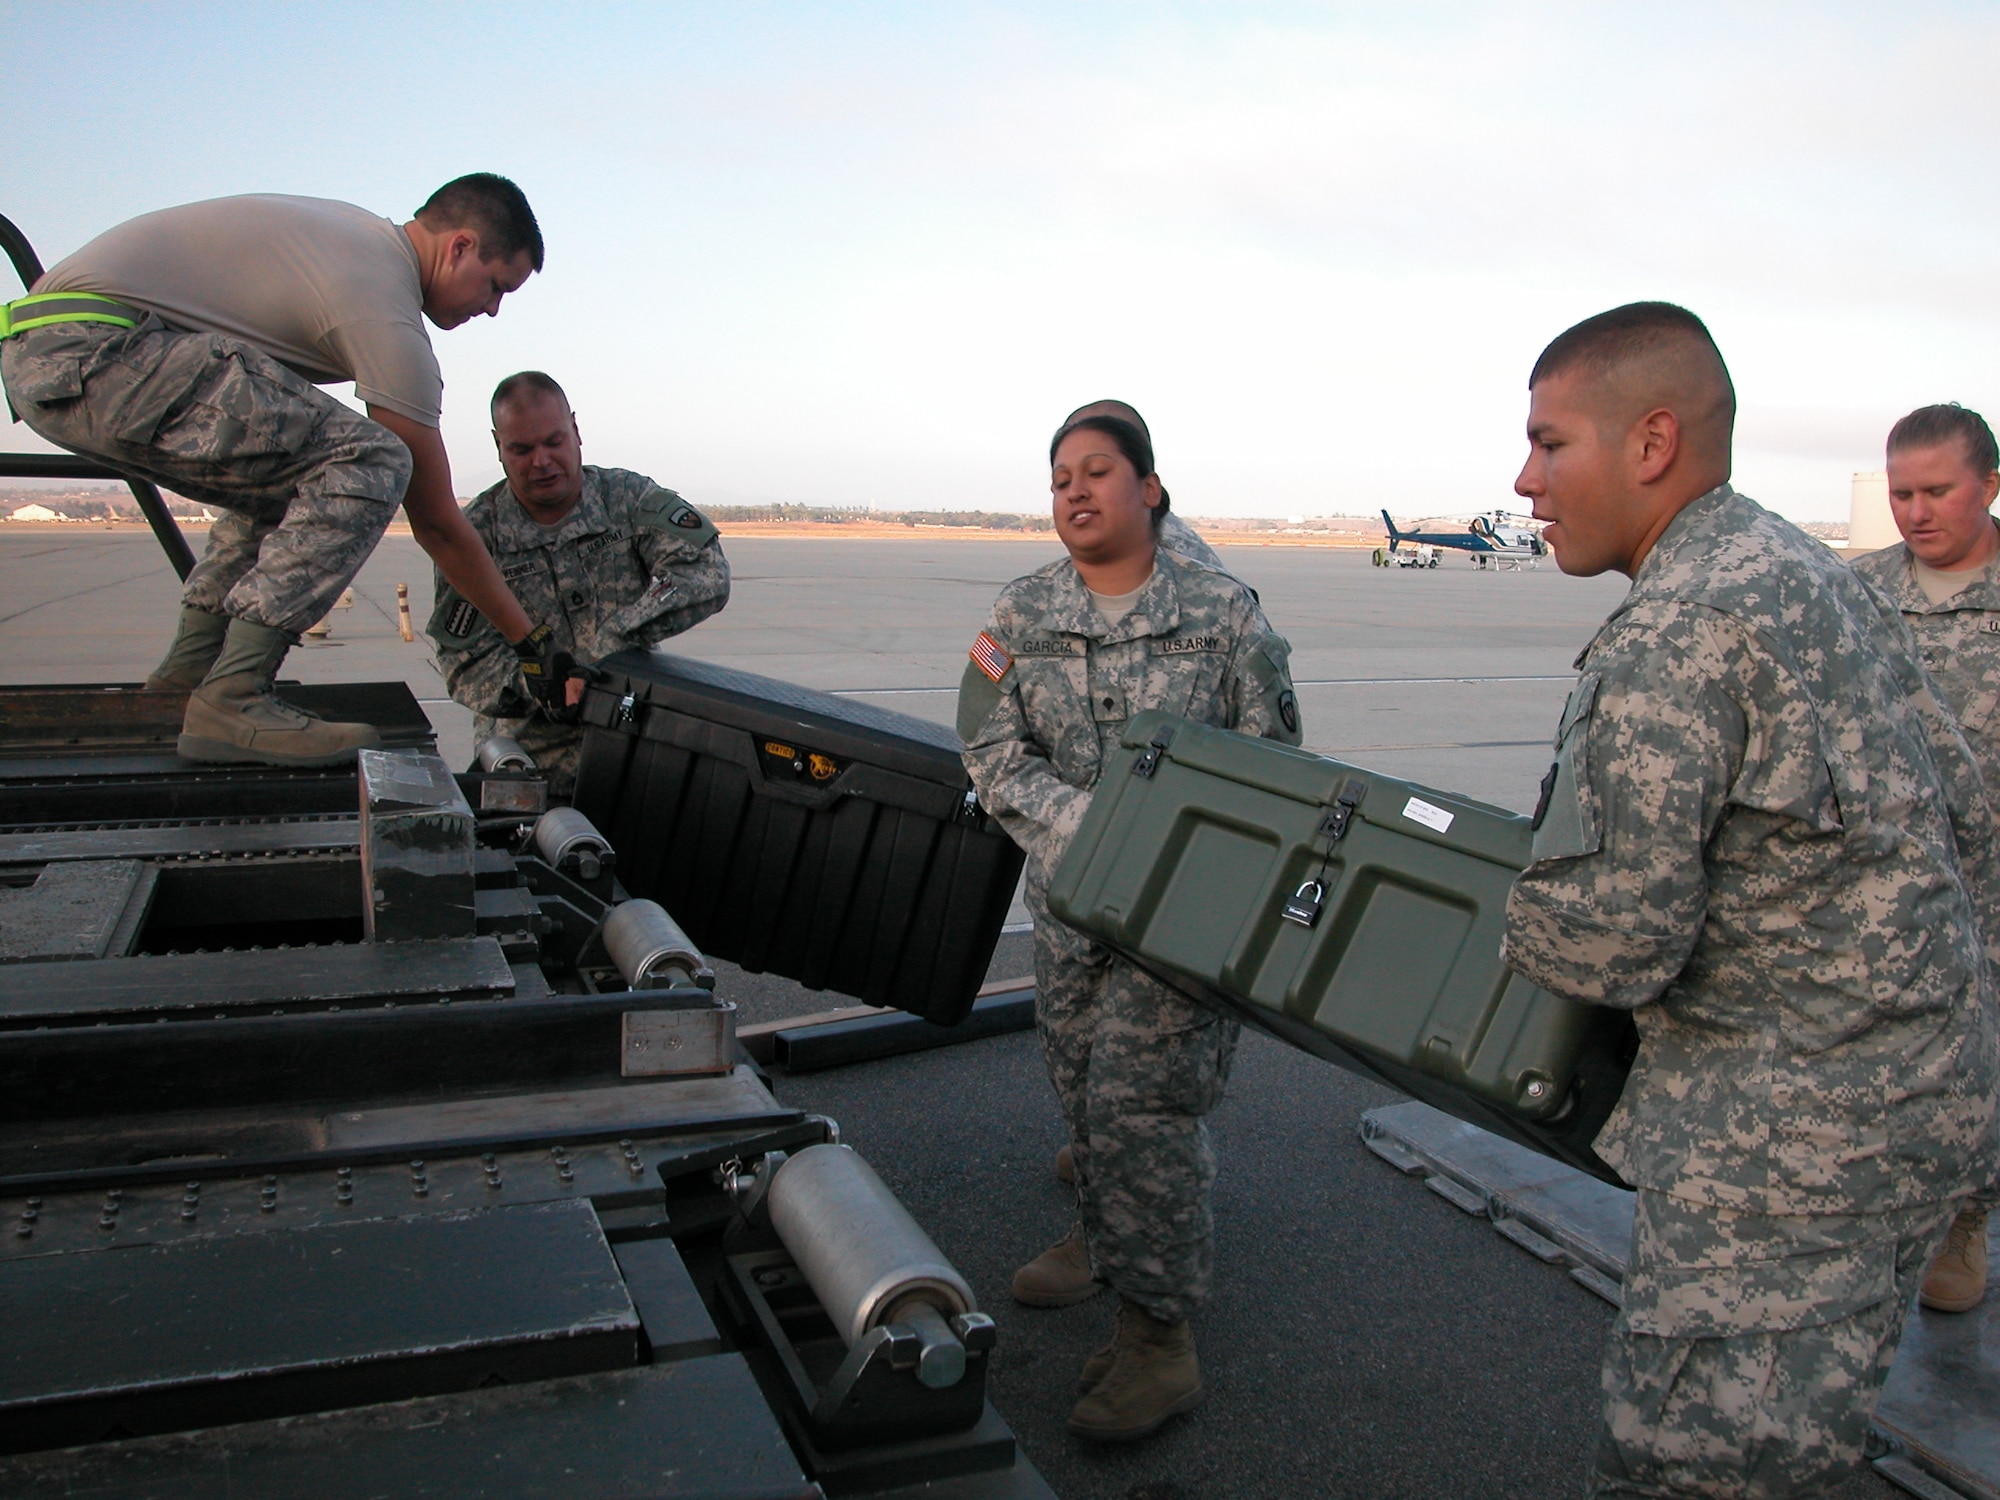 Members of the Army National Guard’s 304th Sustainment Brigade load equipment on a K-loader to prepare for their unit’s deployment to Iraq. In all, they loaded about 36,500 pounds of cargo and personal equipment. After leaving March ARB, they flew to Fort Bliss, Texas where they will train for six weeks before heading to Iraq. According to 452 APSF, 34,000 people (approximately 22 million pounds) and about 56 million pounds of cargo are processed from March ARB each year. (U.S. Air Force photo by Staff. Sgt. Joe Davidson)